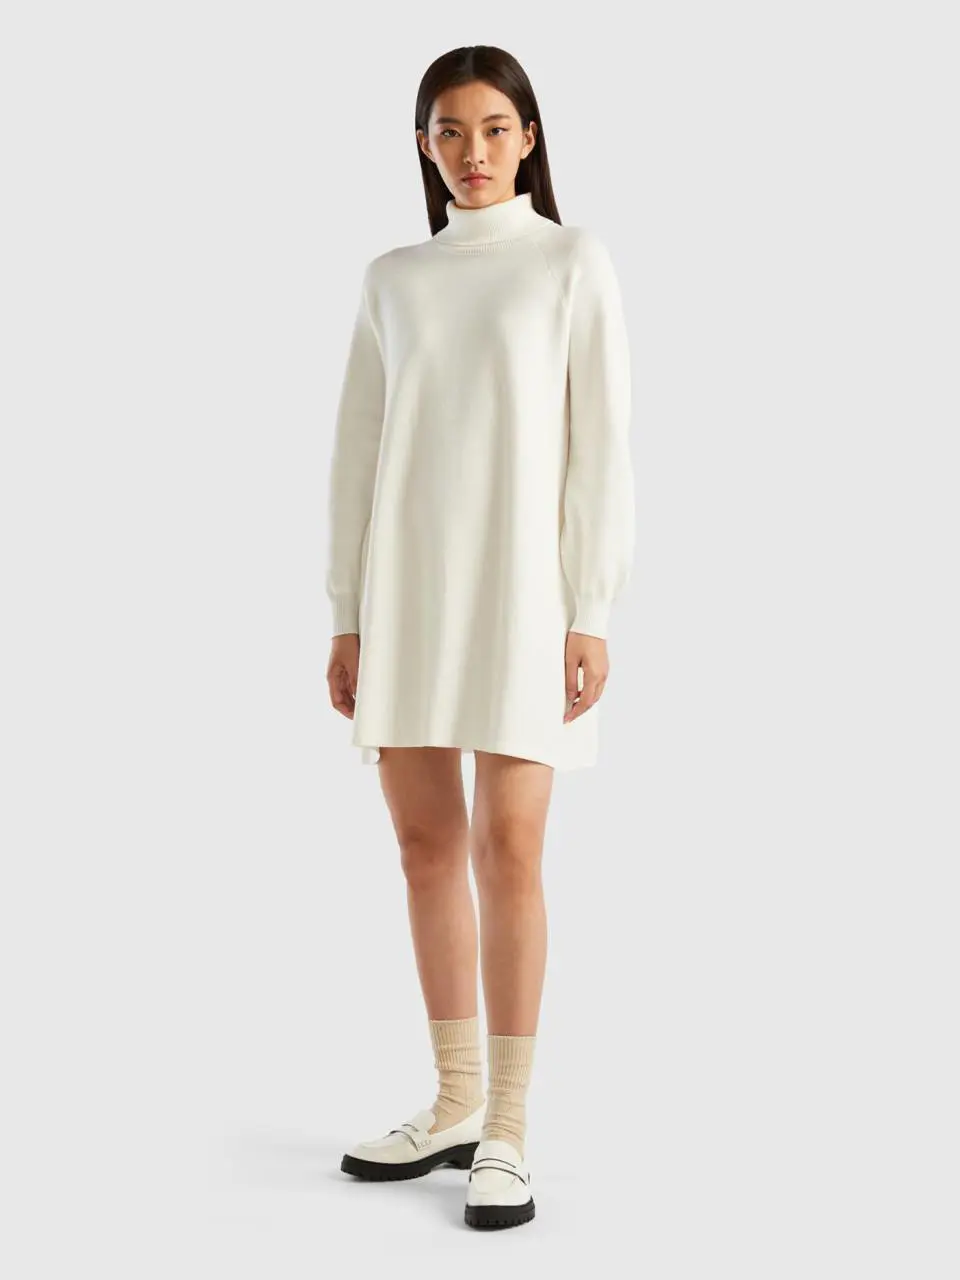 Benetton knit dress with high neck. 1